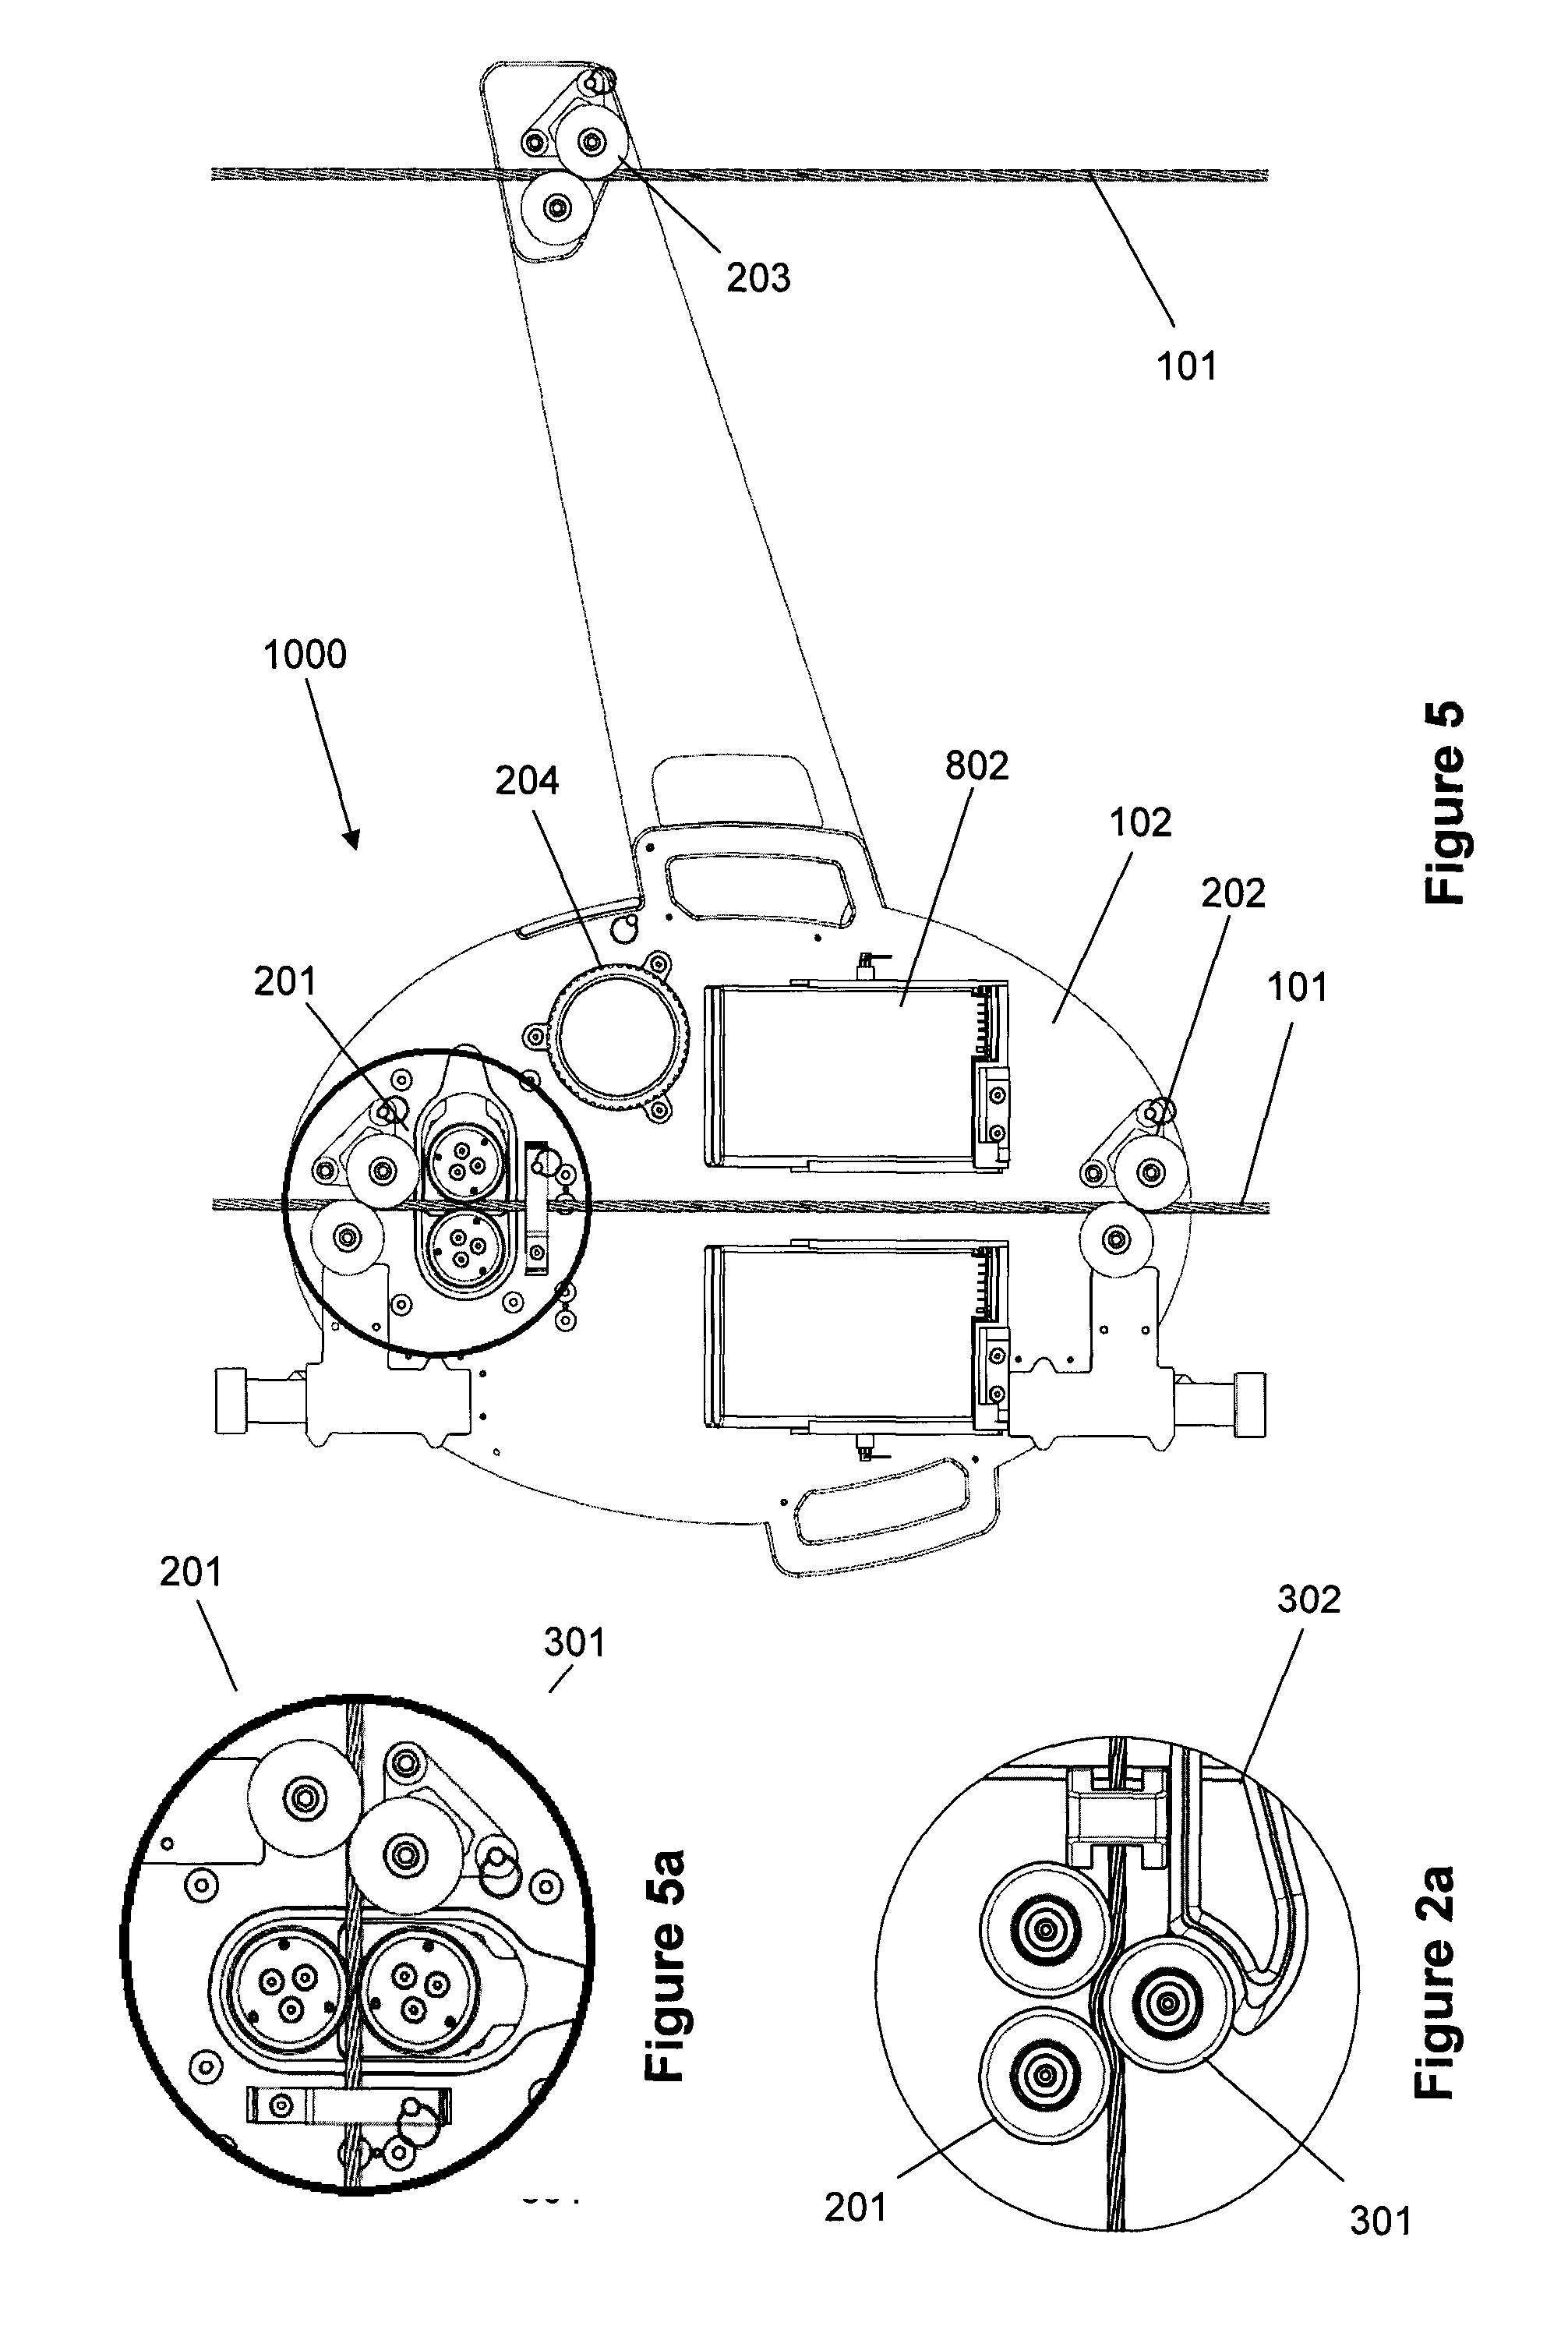 Building inspection device